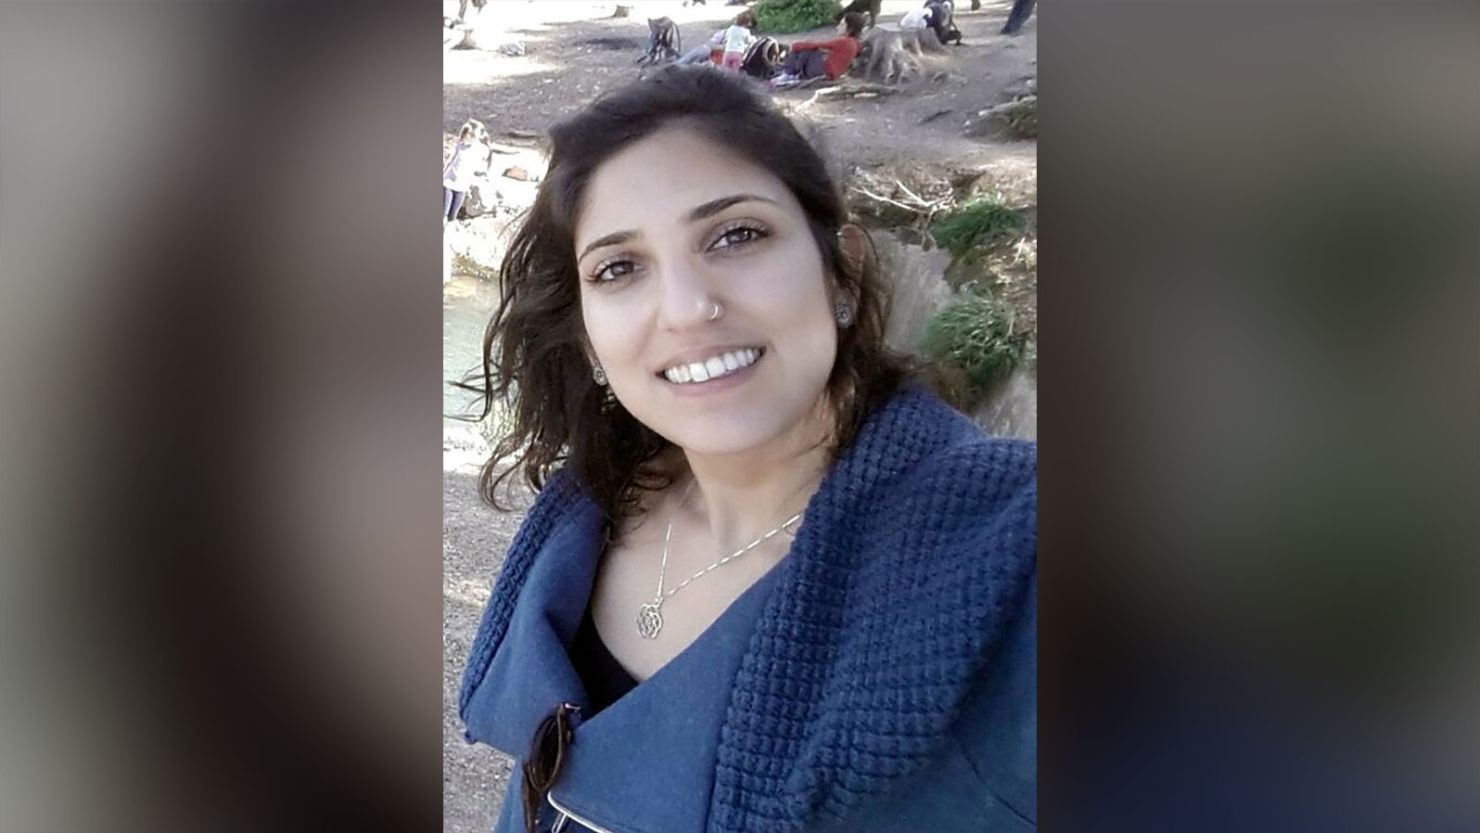 26-year-old Naama Issachar was sentenced to seven and a half years in prison on drug smuggling charges.